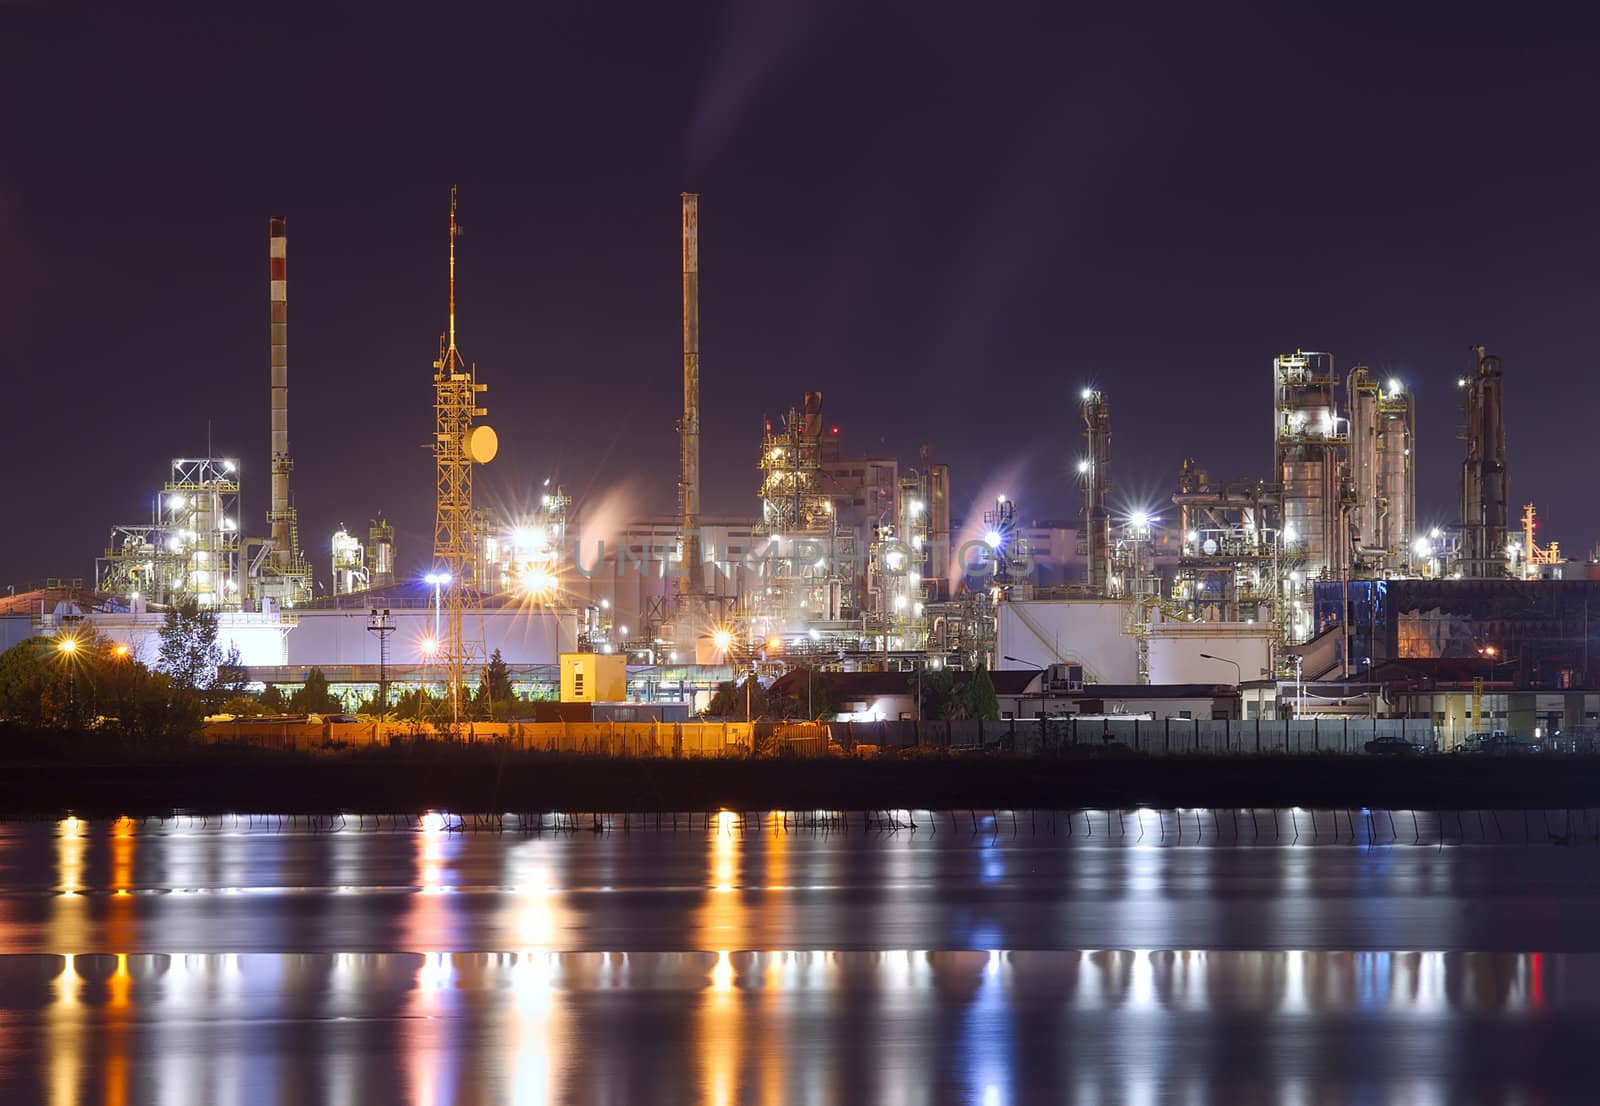 night scene of petrochemical plant with water reflection